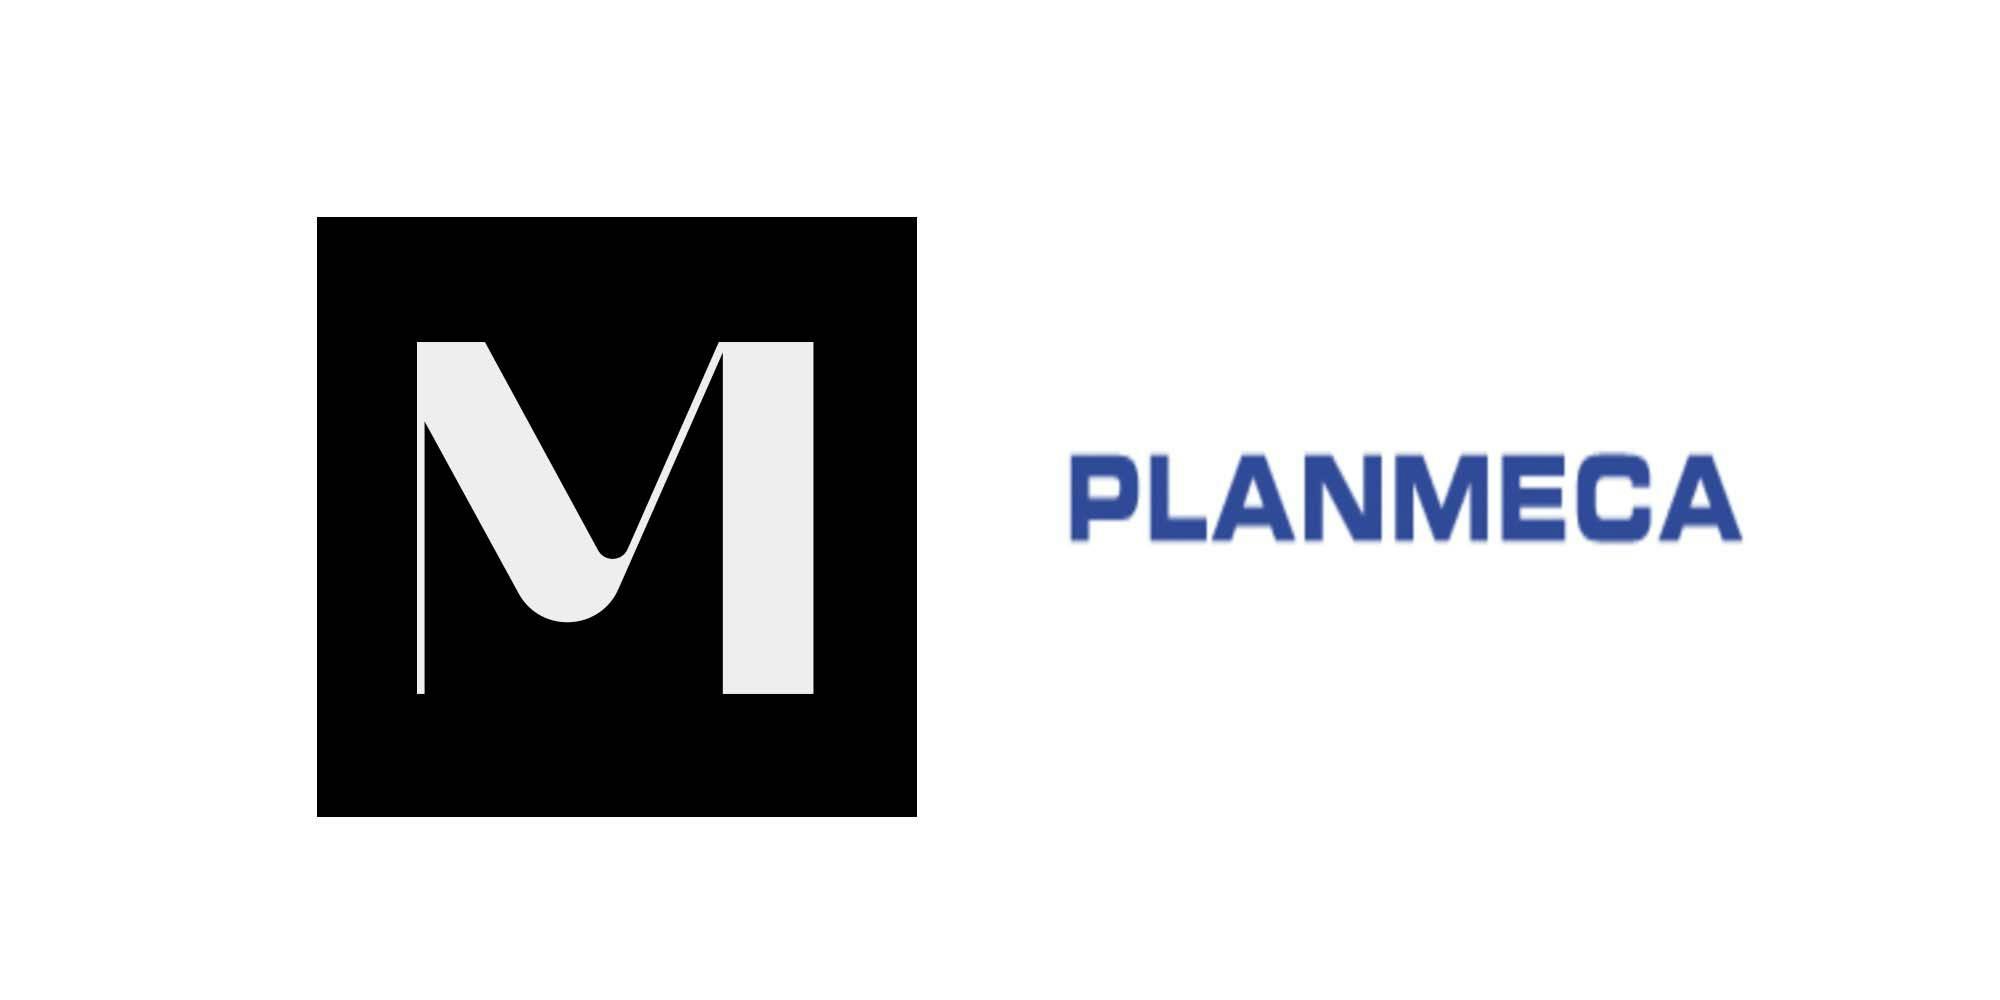 The MOD Institute and Planmeca logo